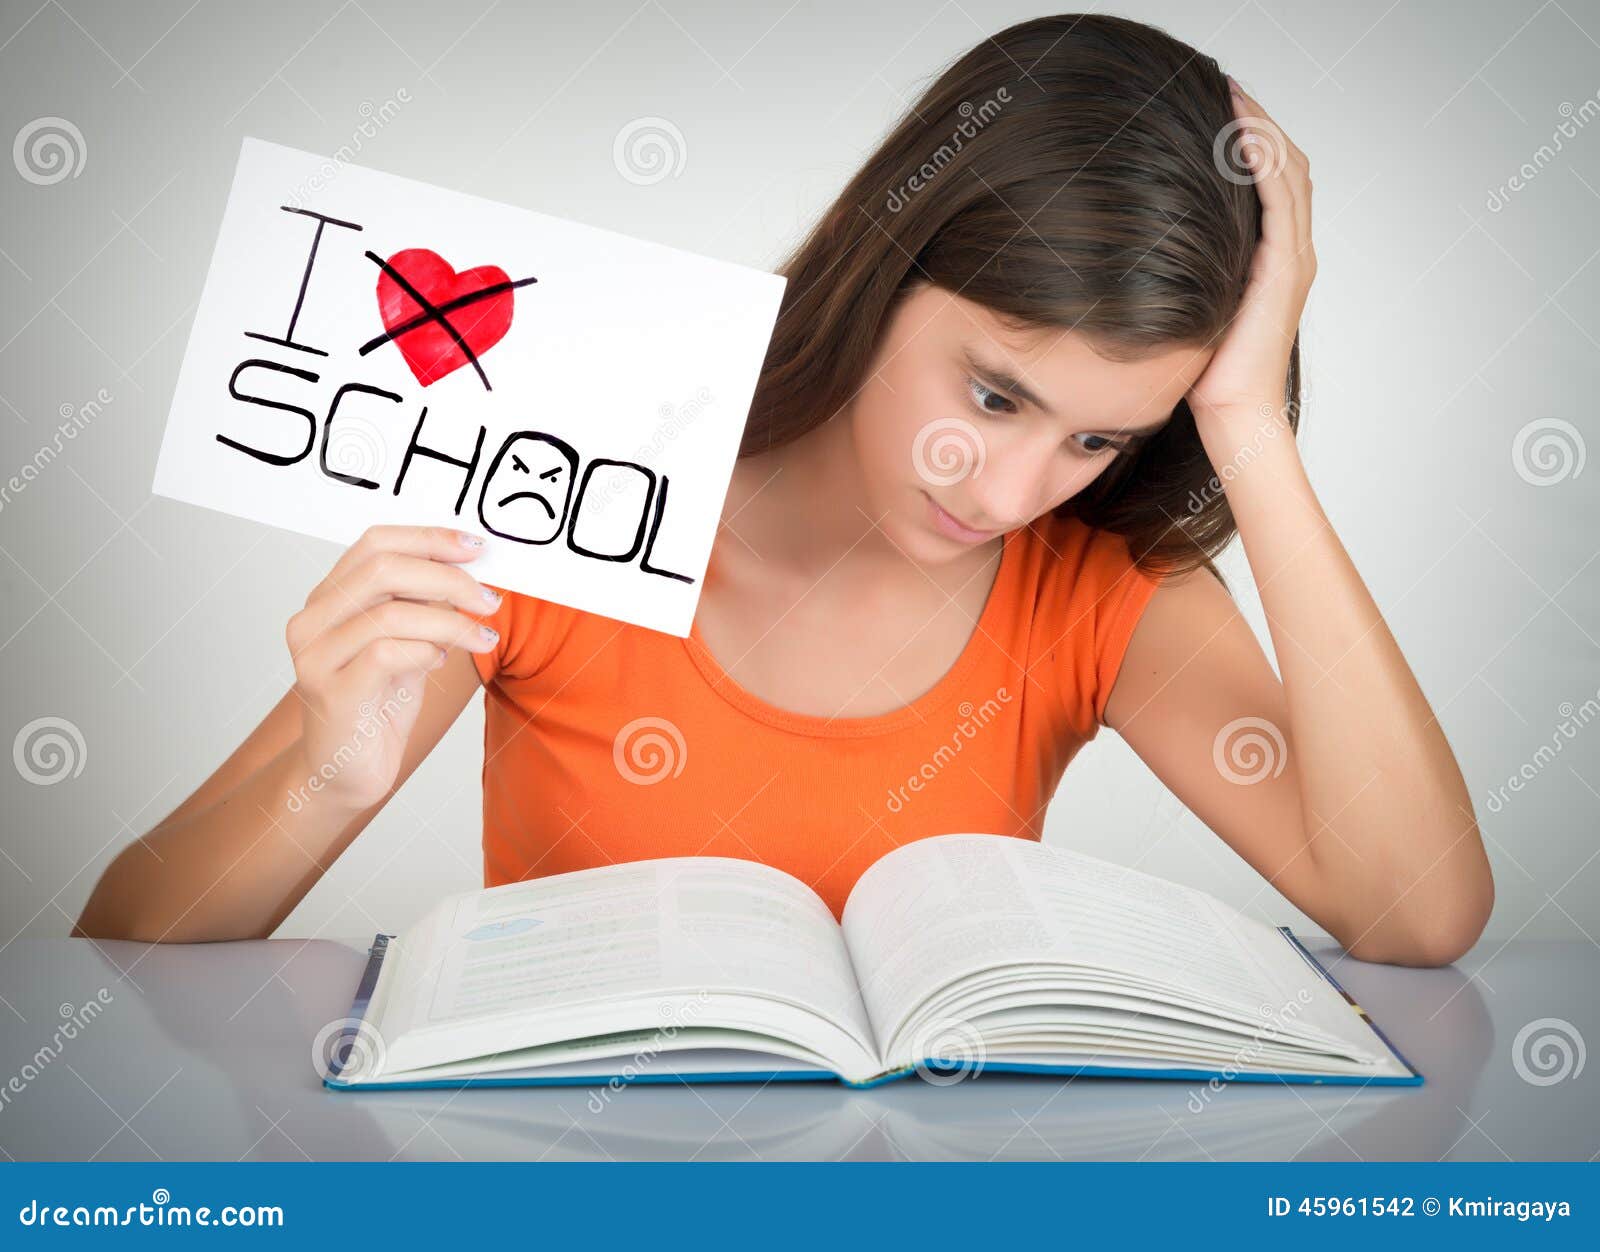 Student Holding a Sign with the Words I Hate School Stock Photo ...